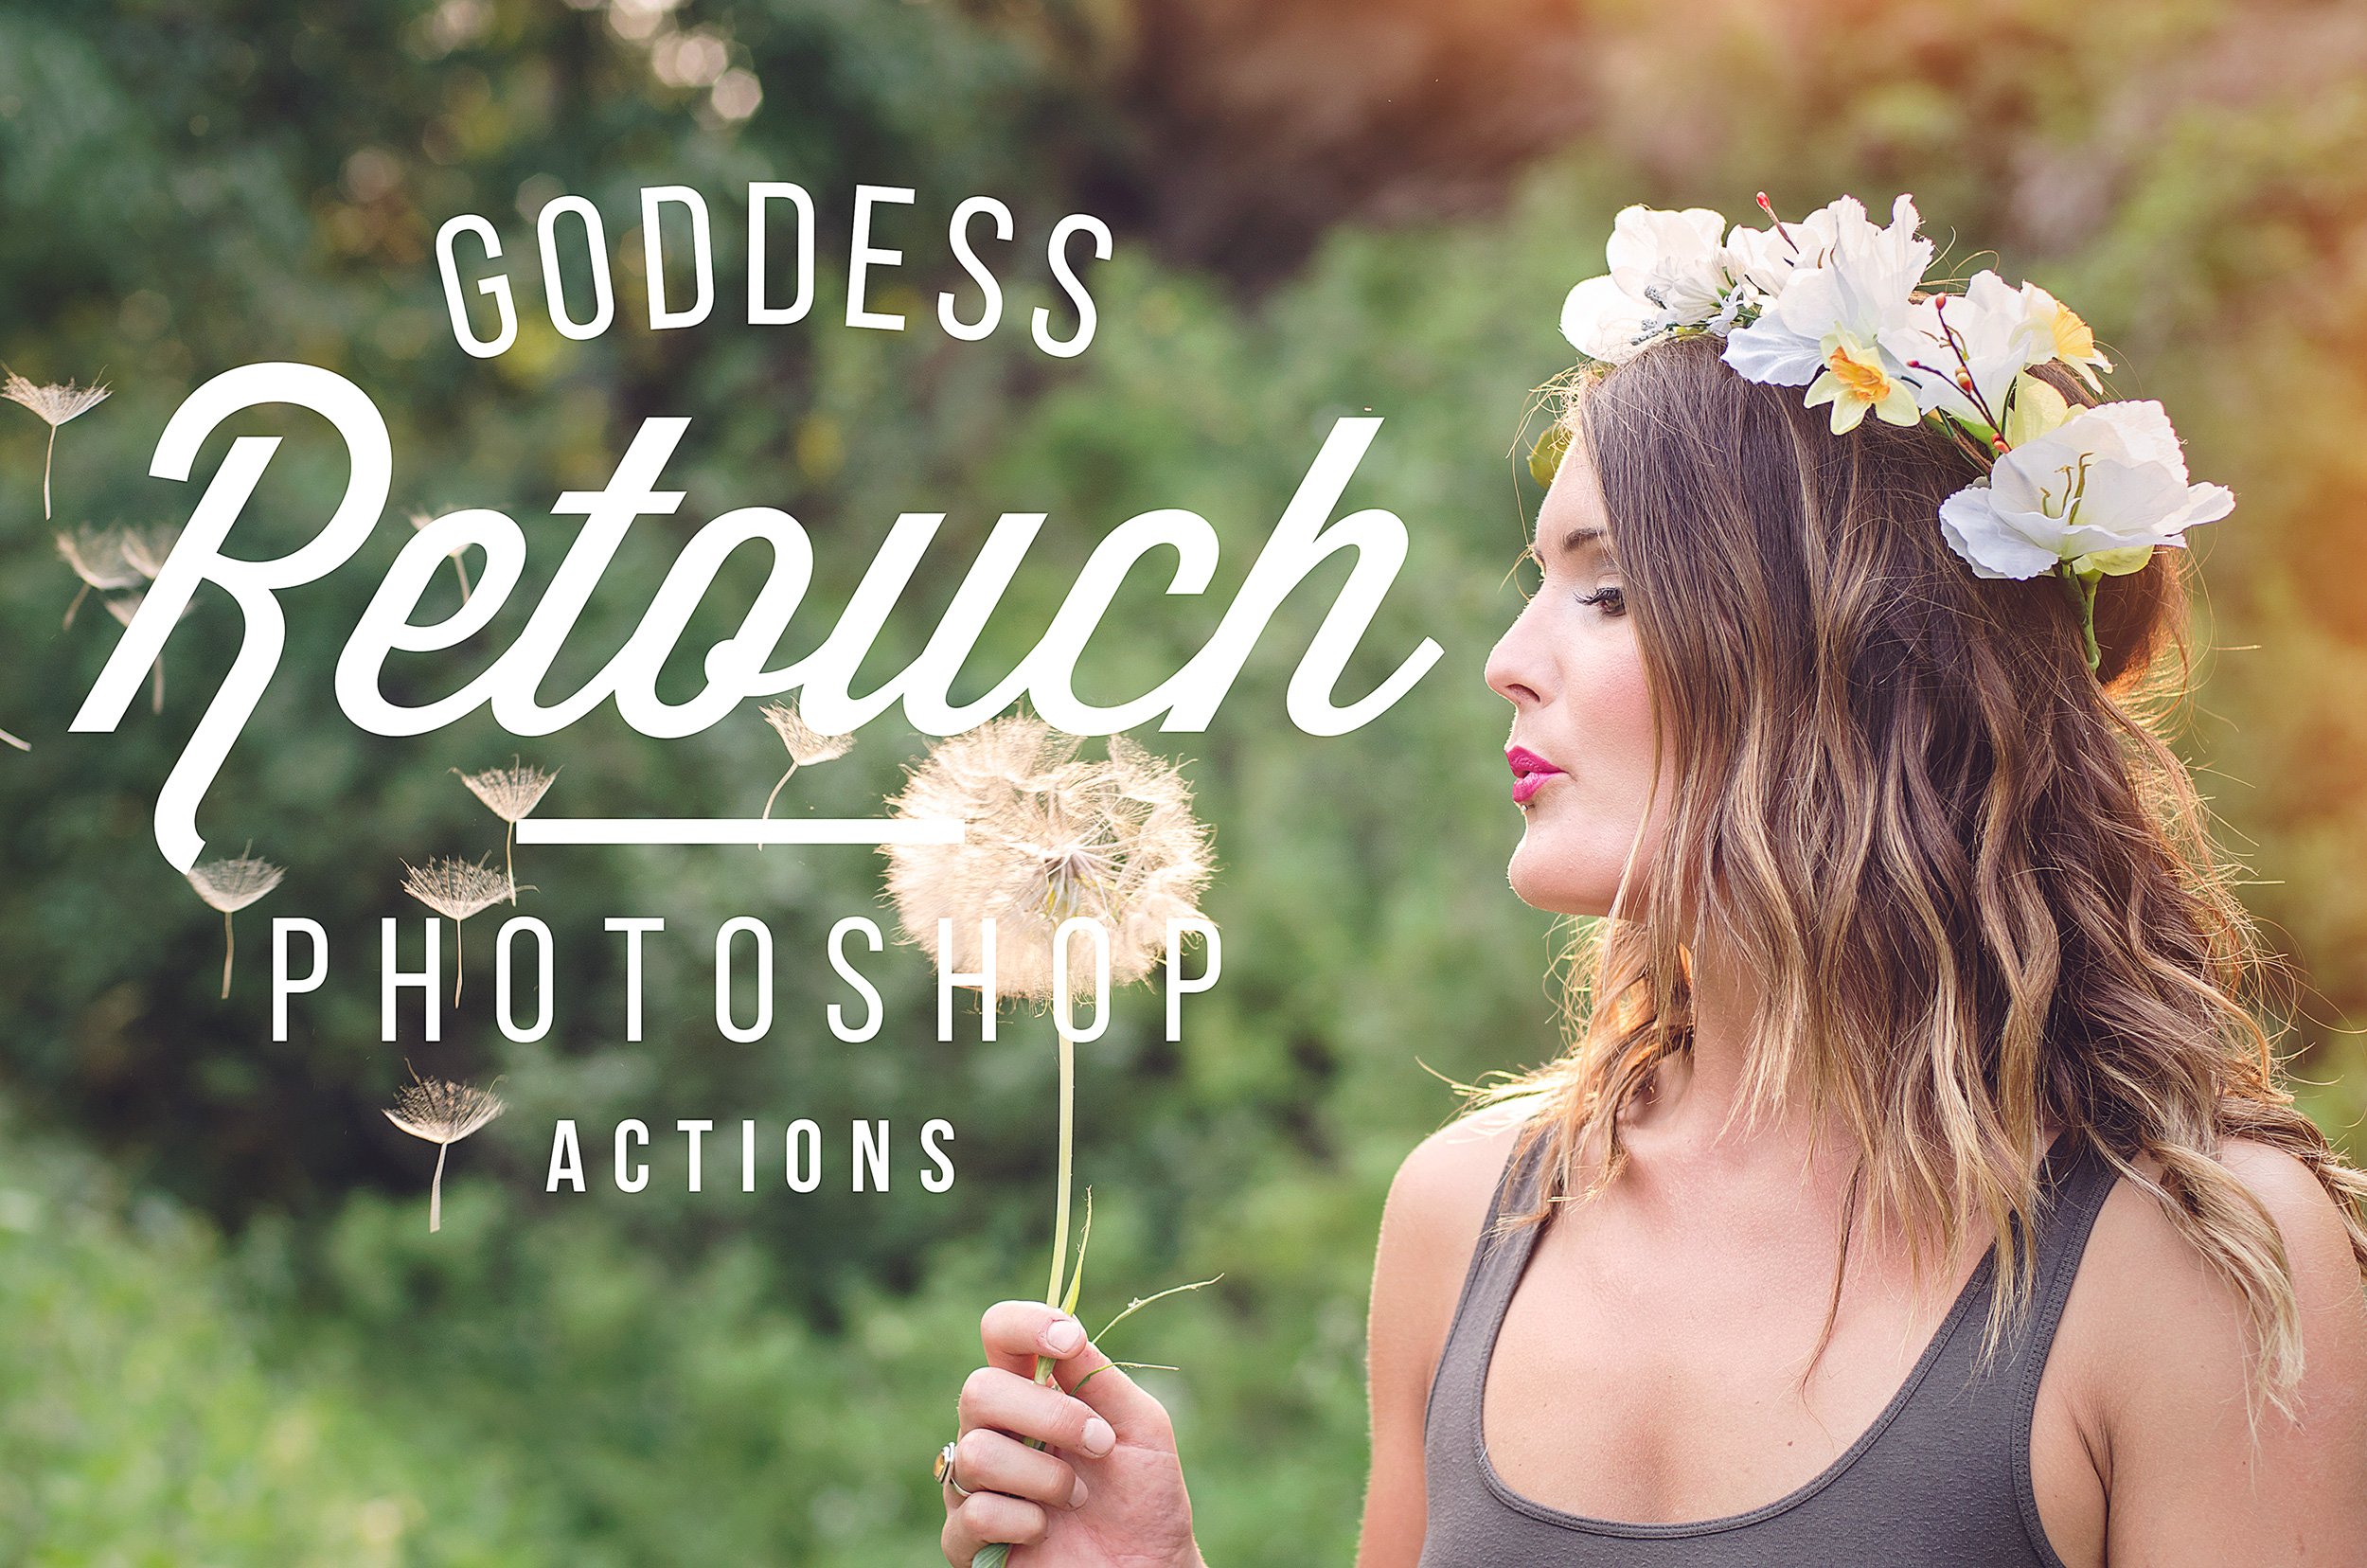 Goddess Retouch Collectioncover image.